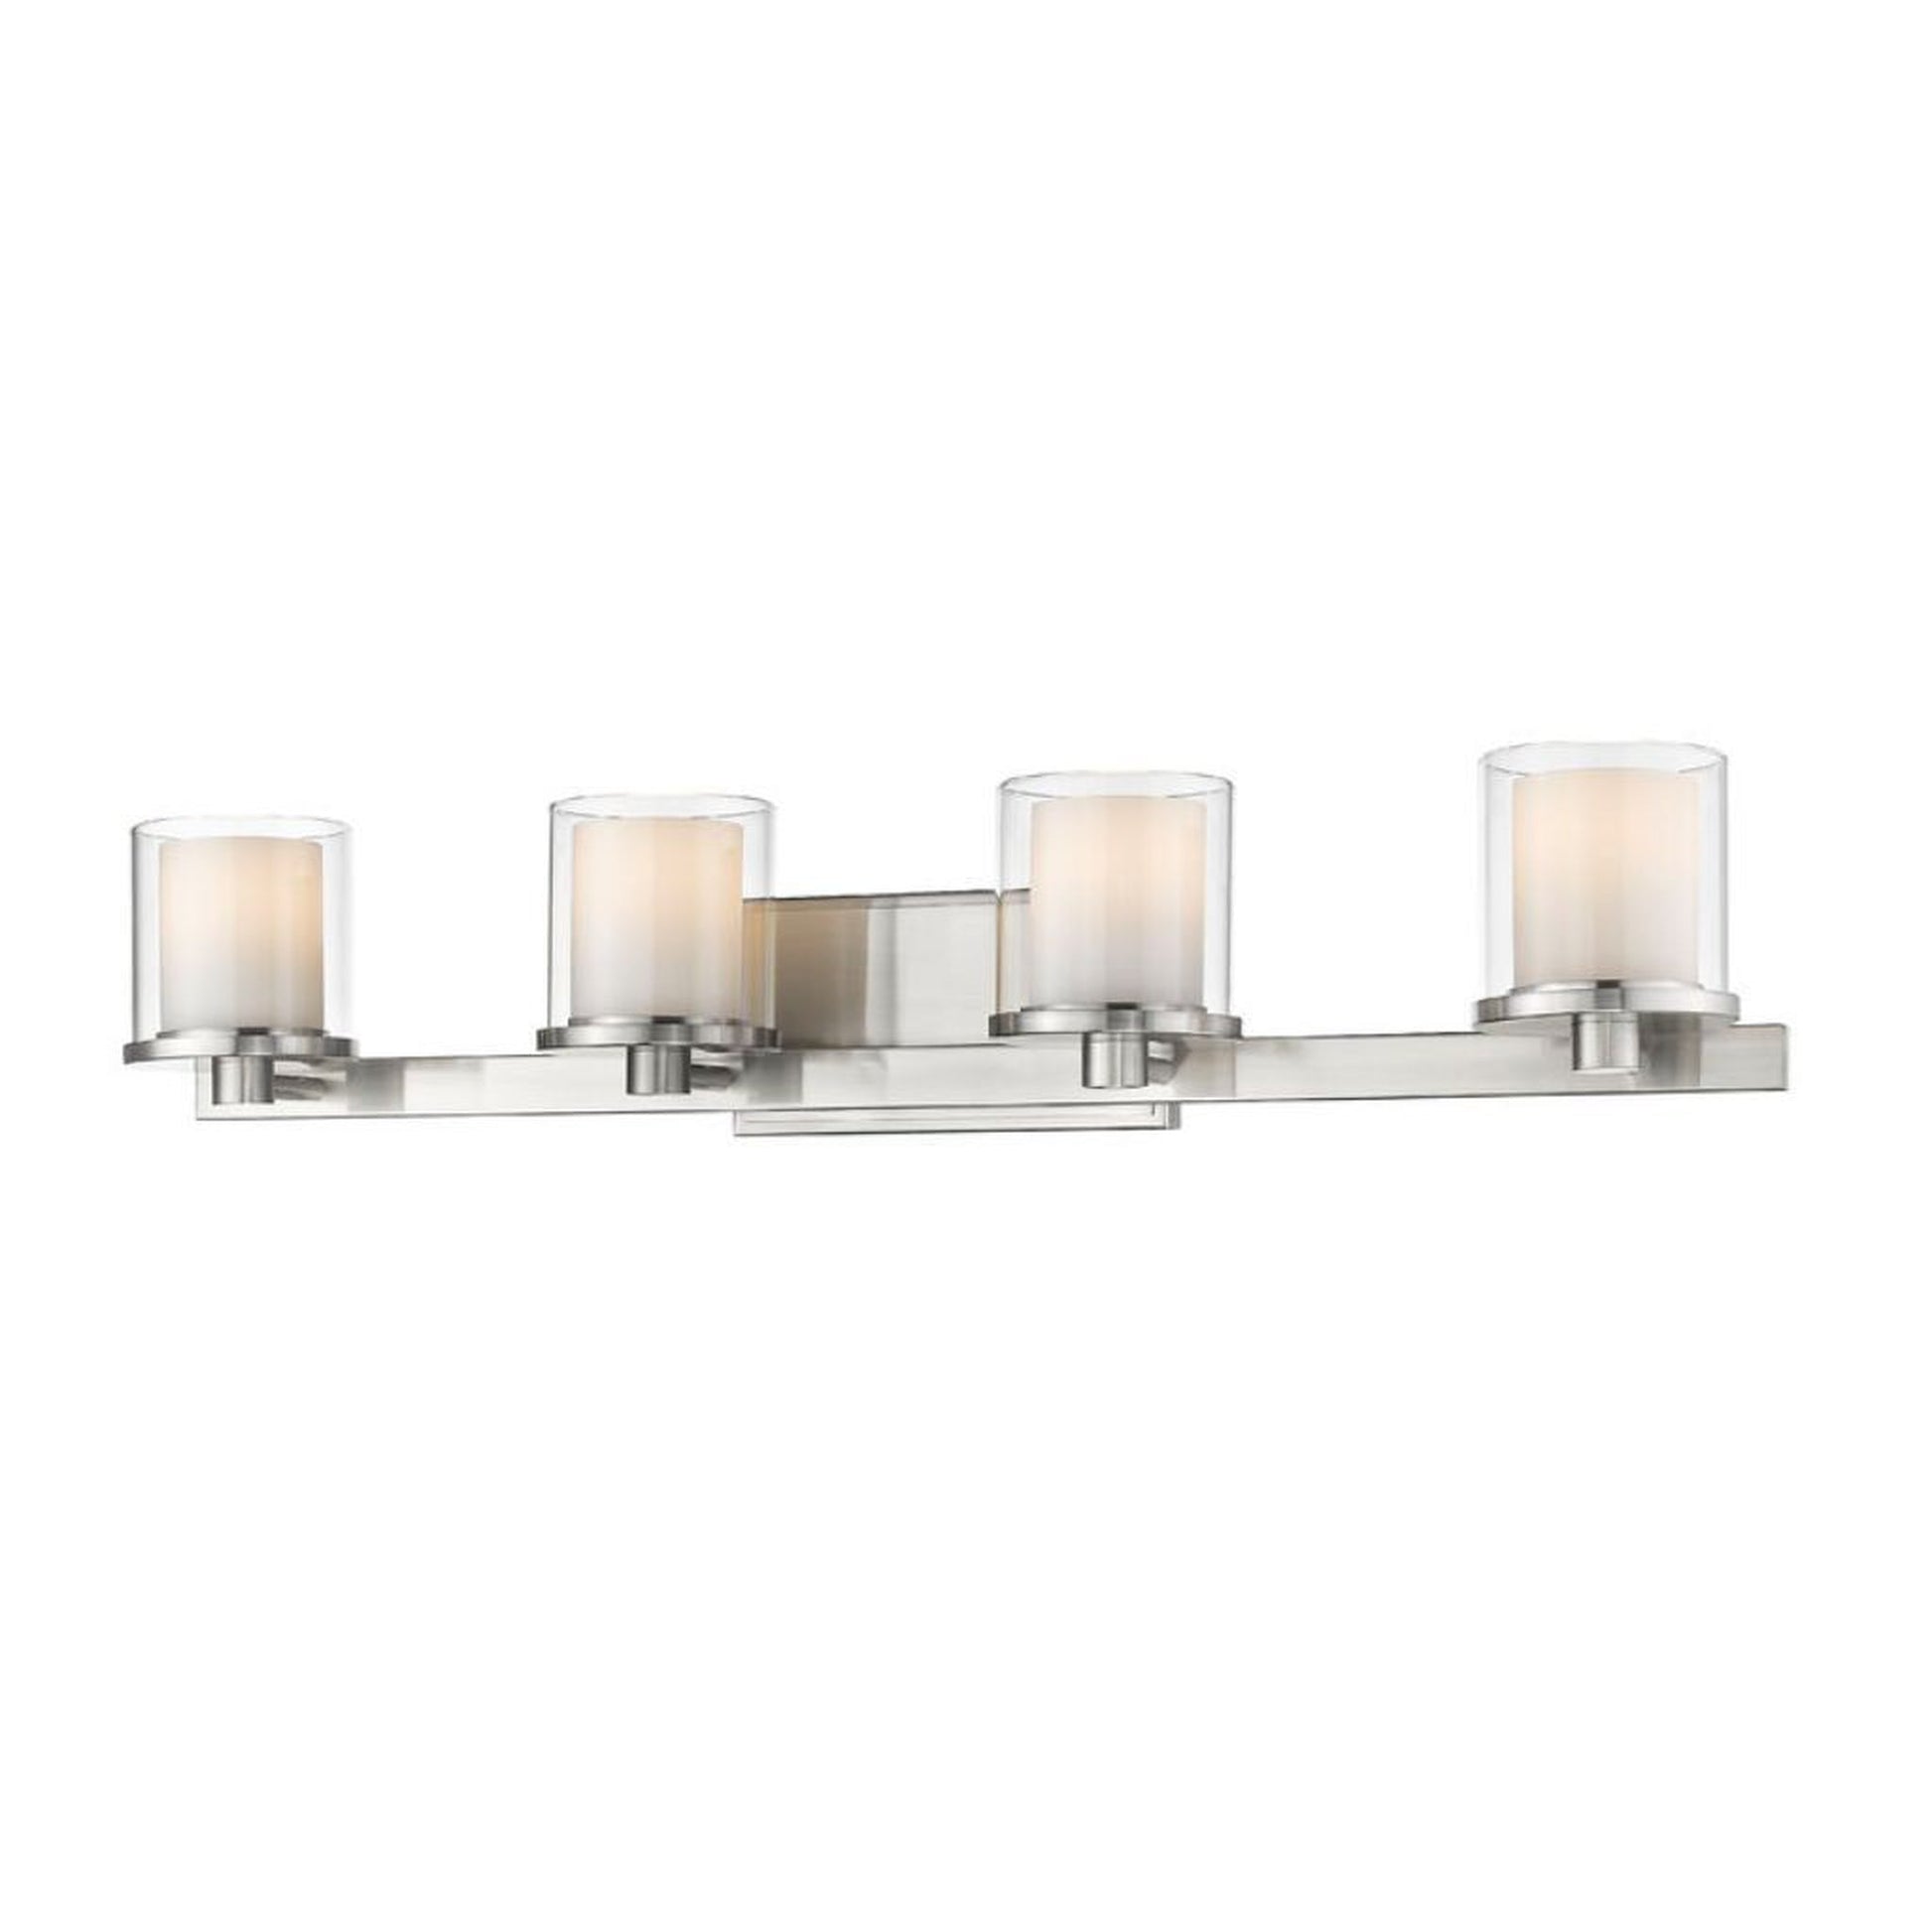 Z-Lite Schema 32" 4-Light LED Brushed Nickel Vanity Light With Clear and Matte Opal Glass Shade